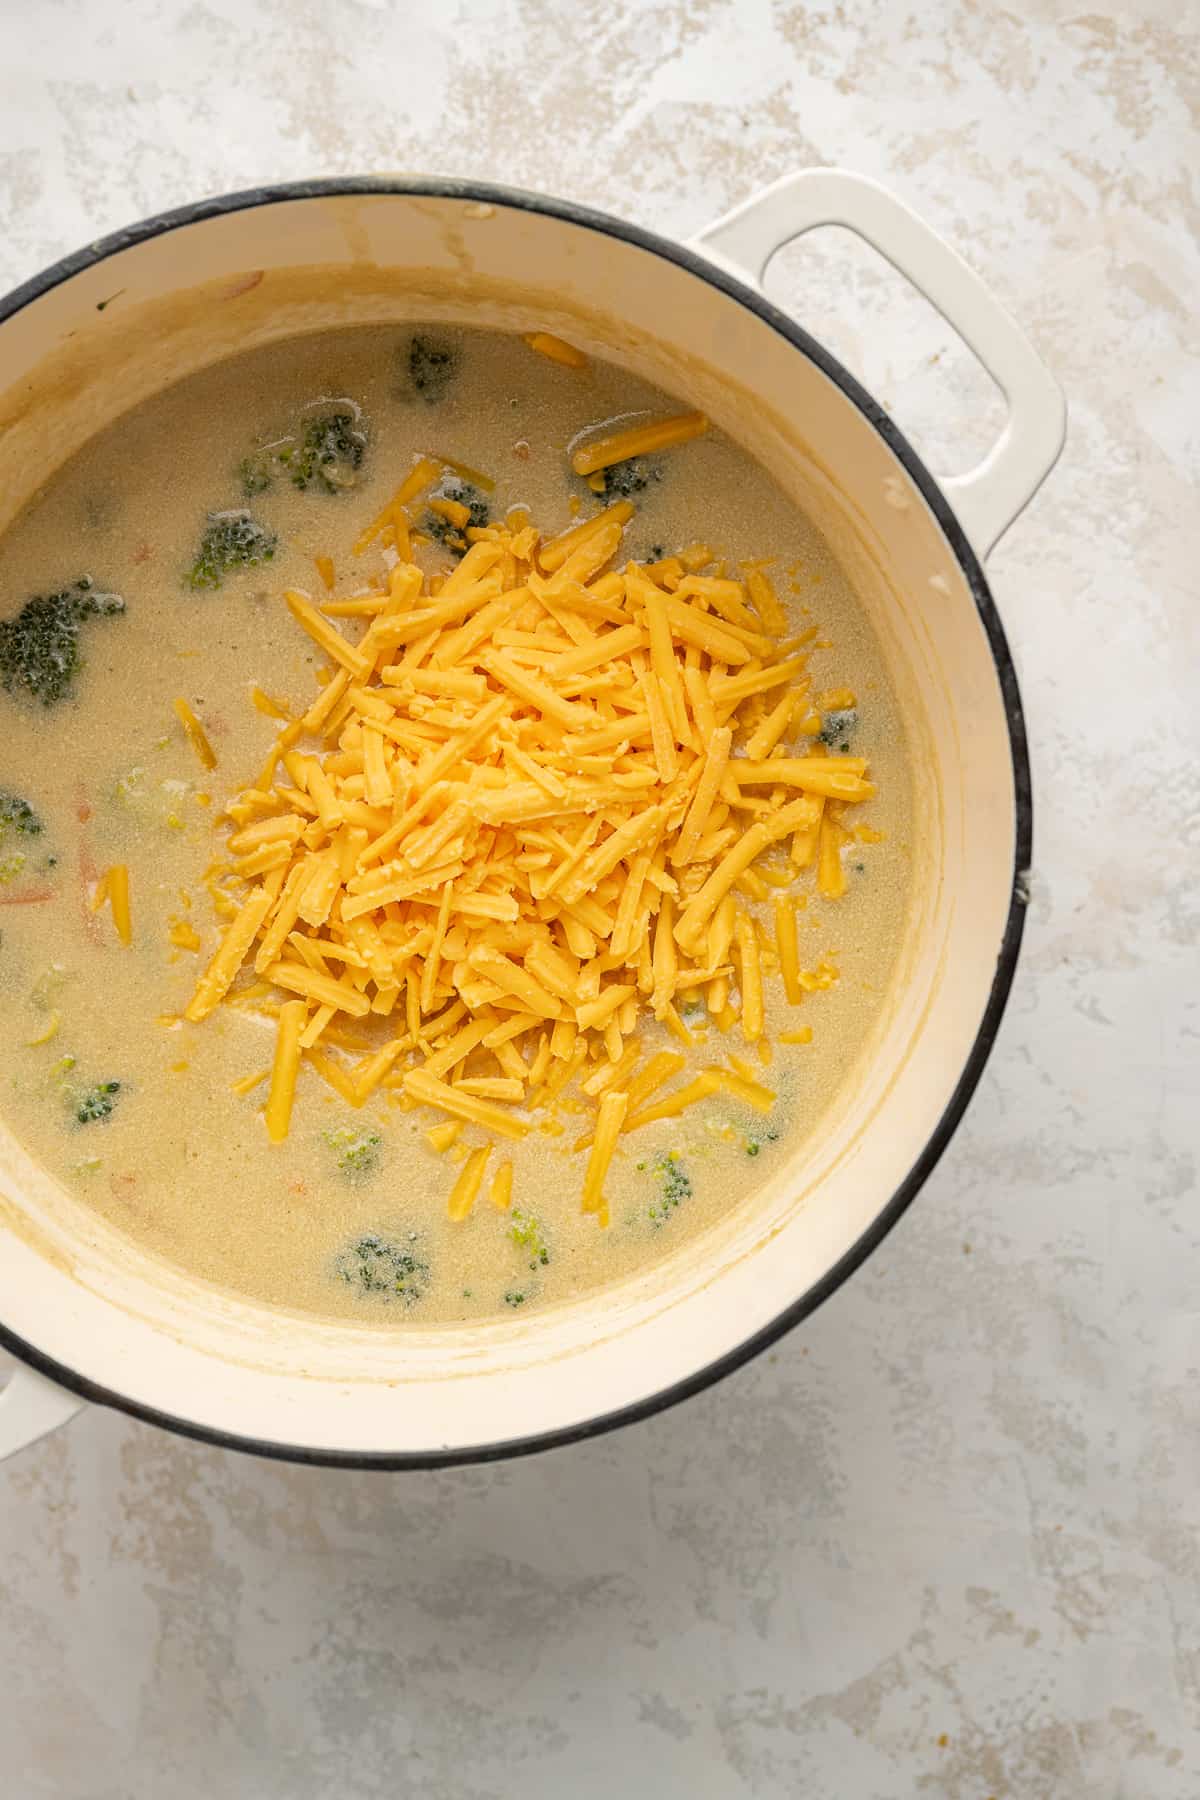 cheddar shreds being added to broccoli cheddar soup in a white dutch oven.